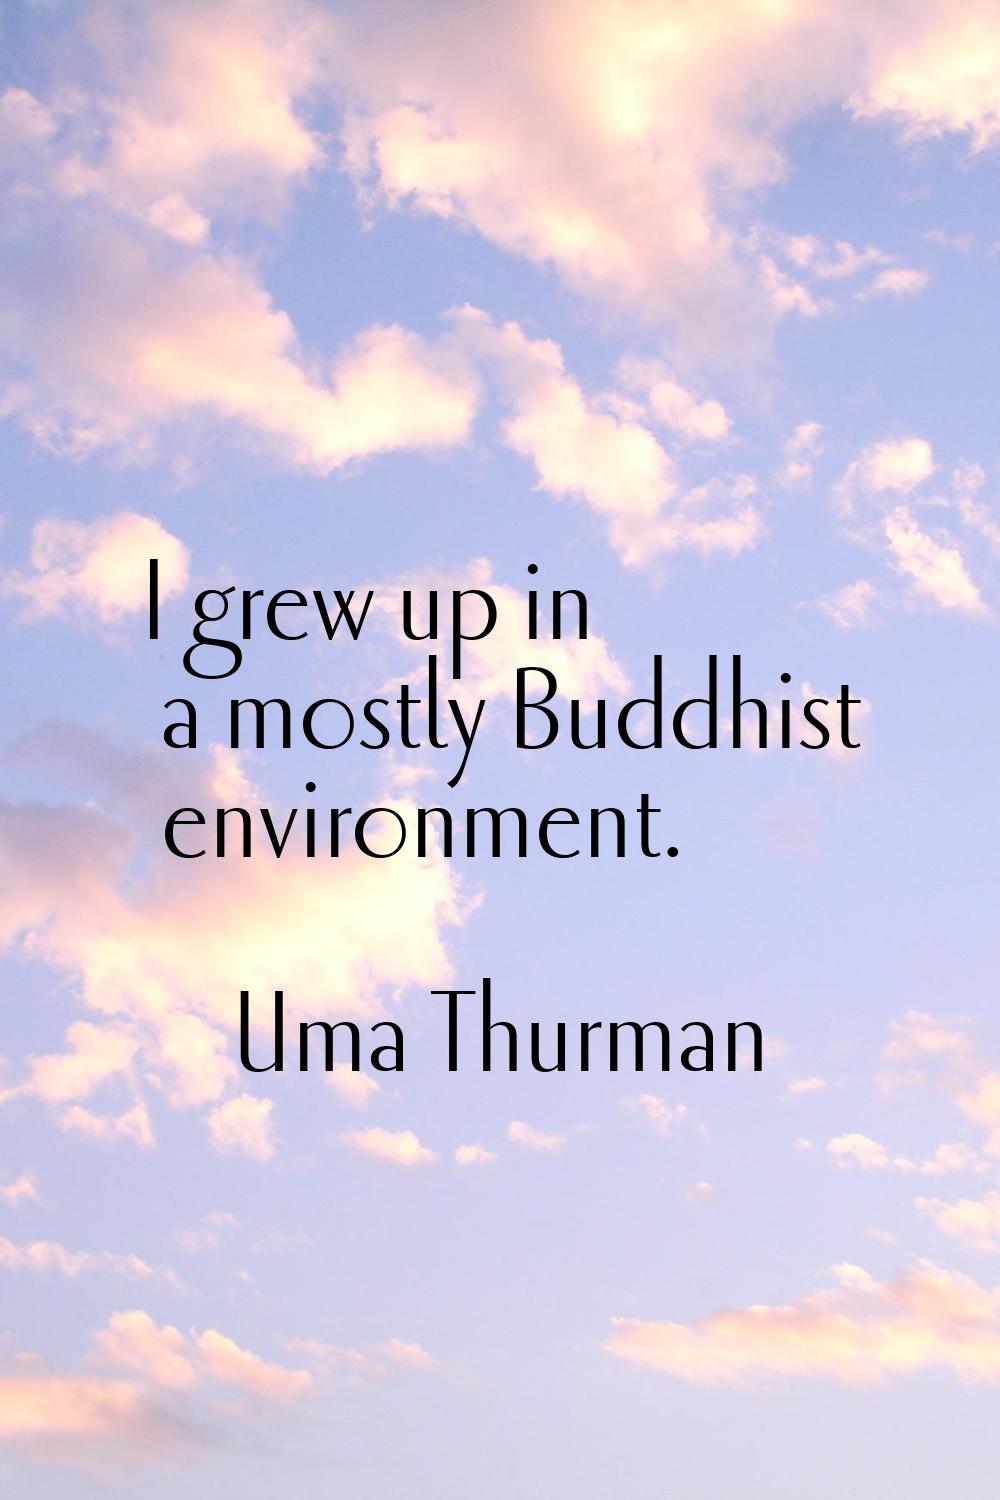 I grew up in a mostly Buddhist environment.